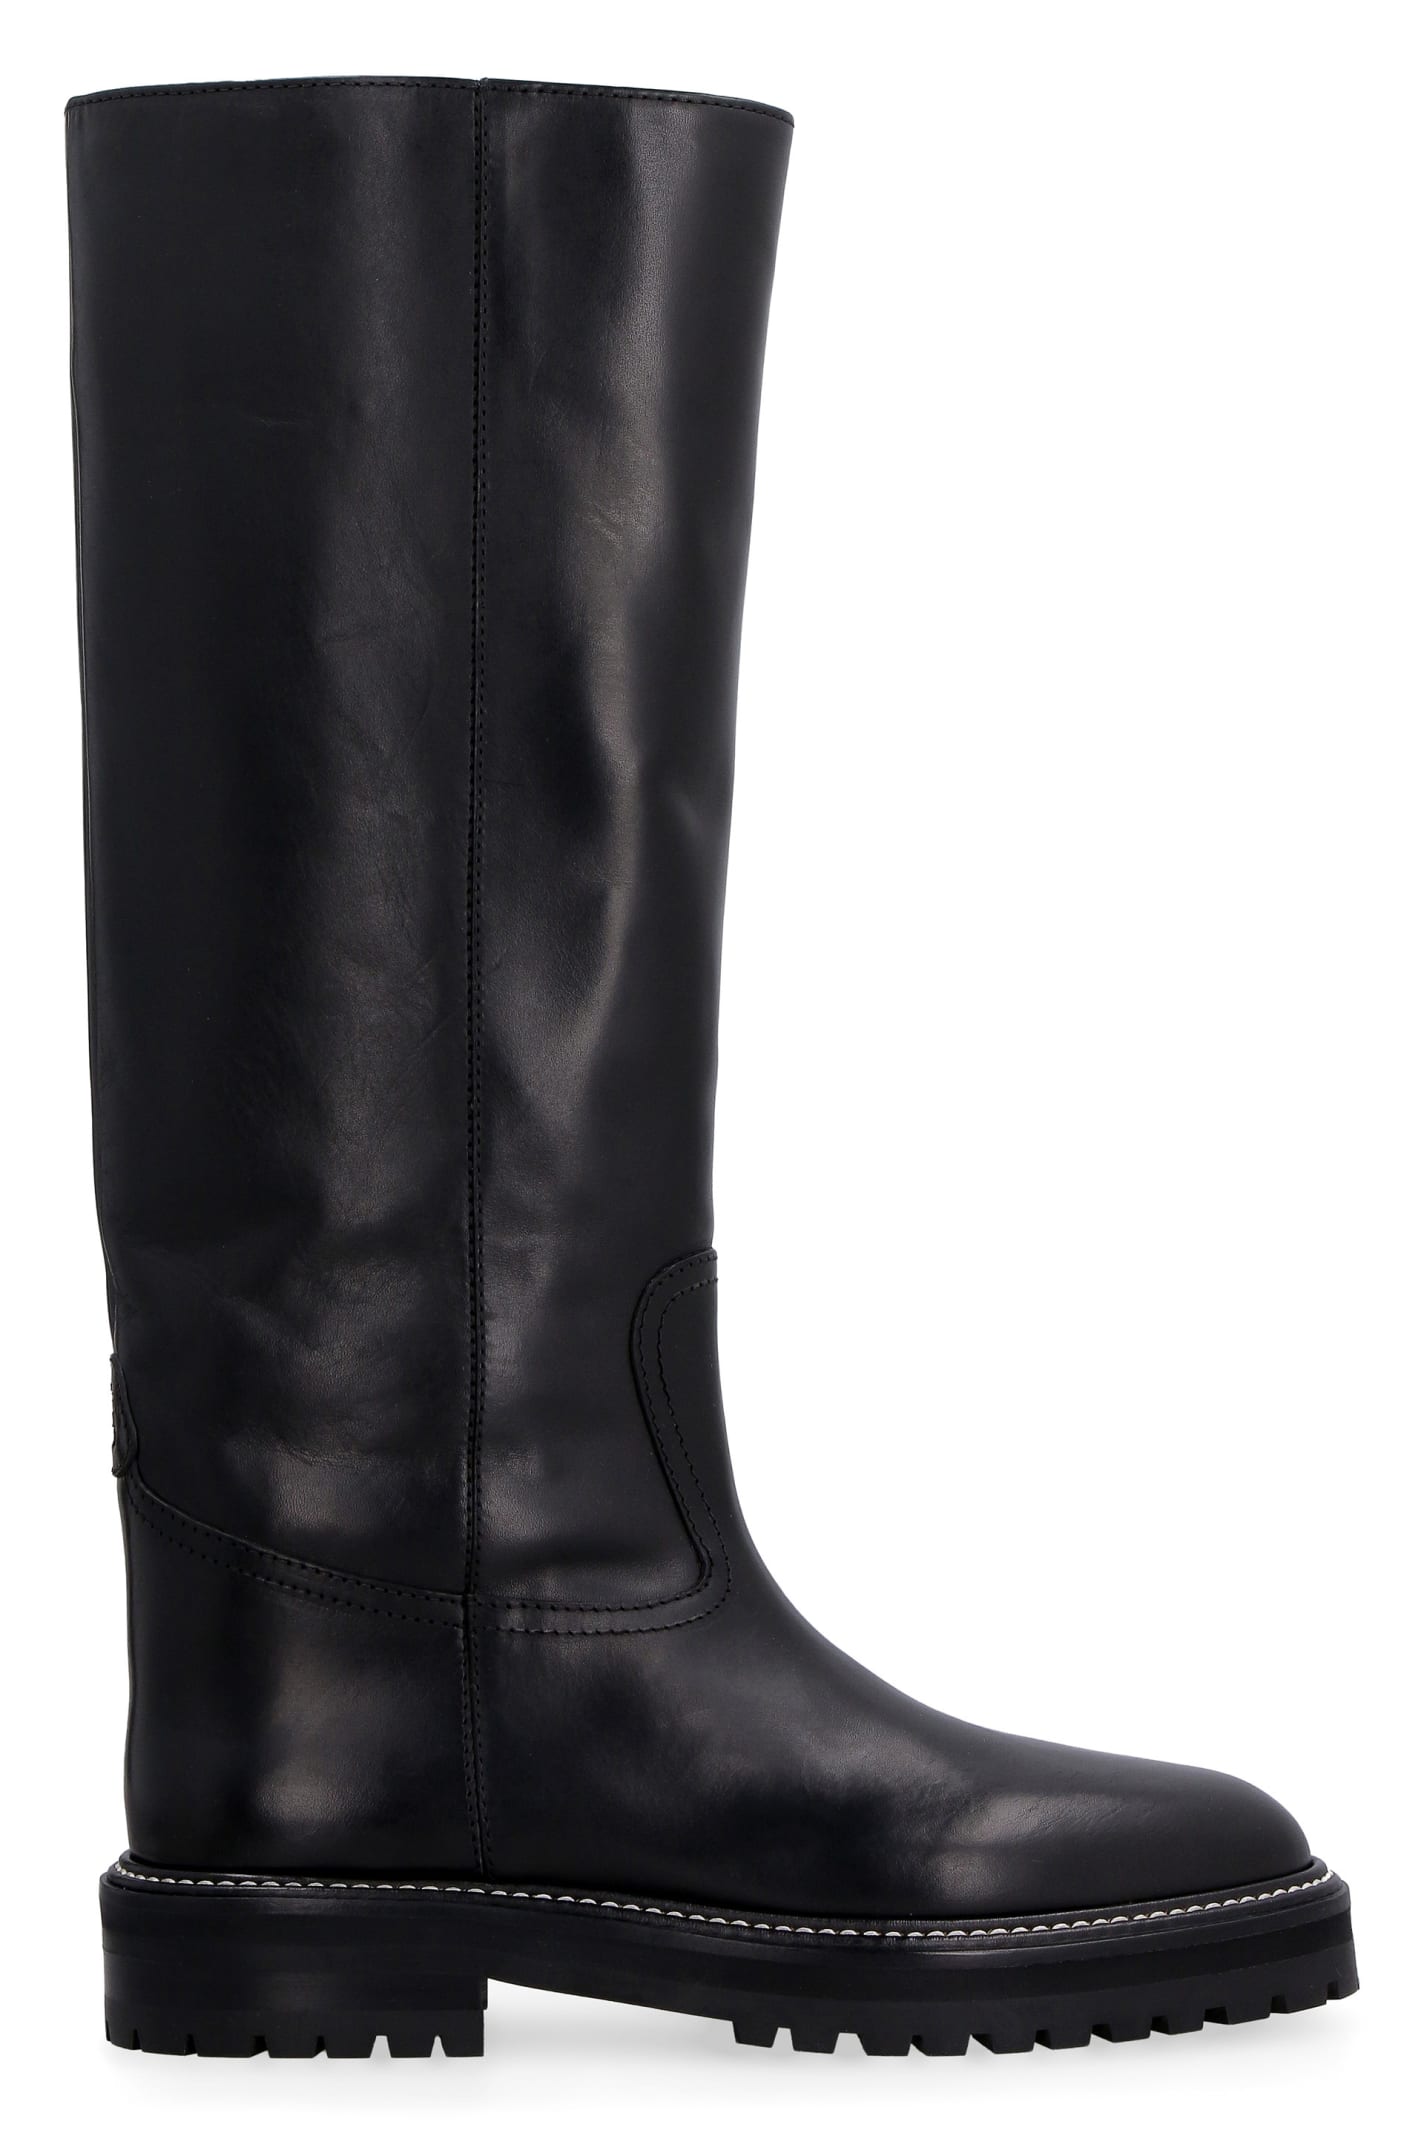 Jimmy Choo Yomi Leather Boots